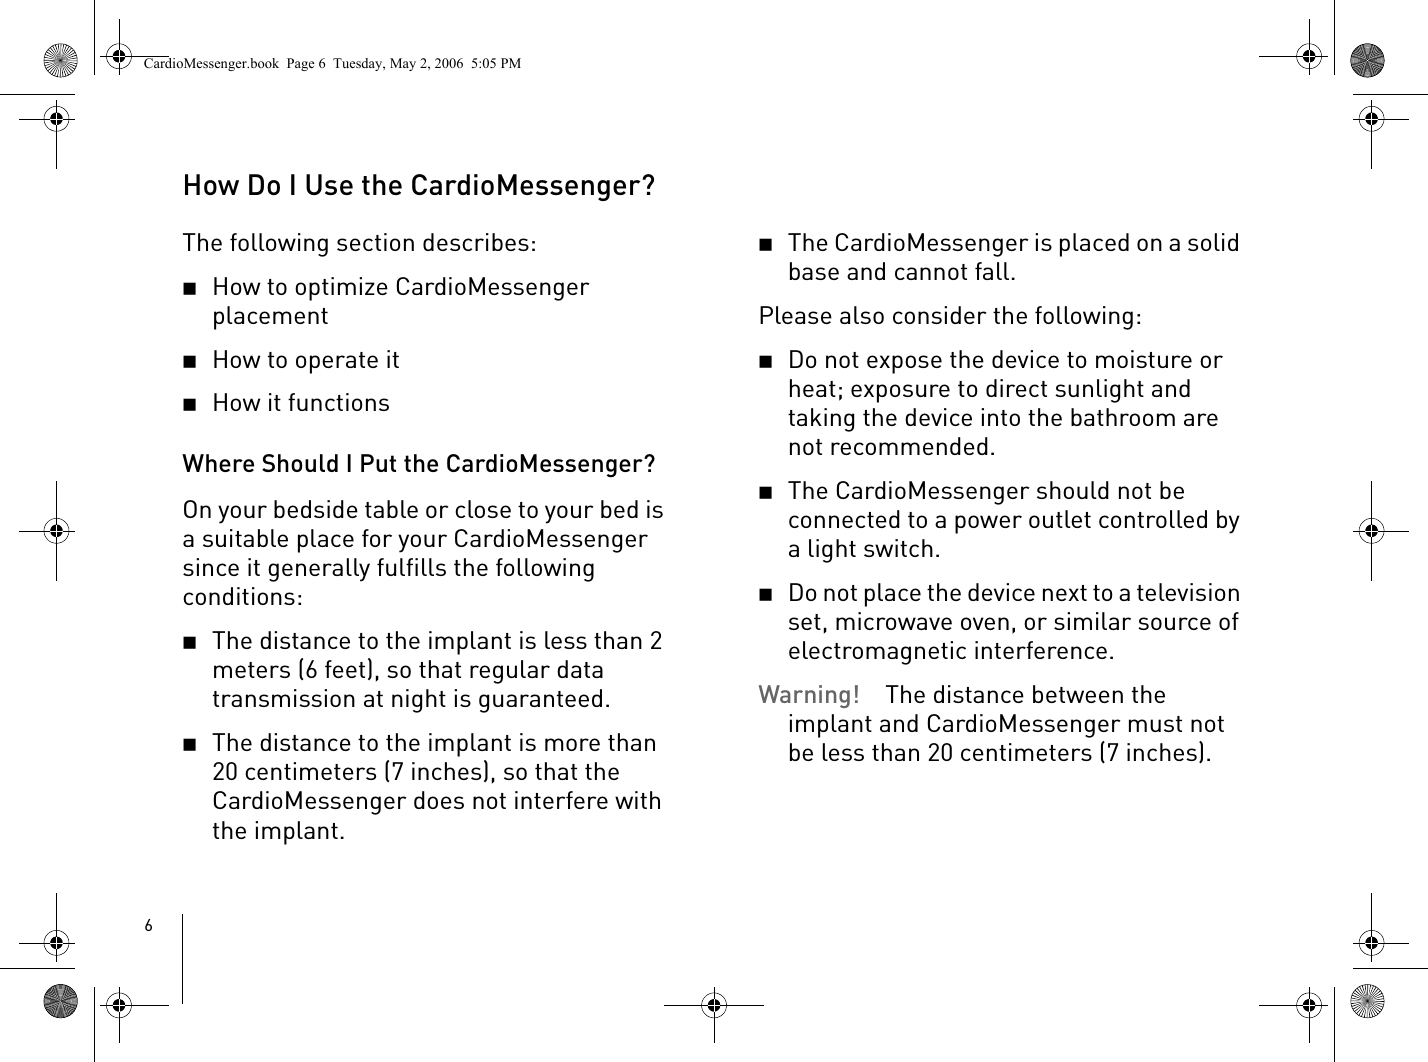 6How Do I Use the CardioMessenger?The following section describes: 2How to optimize CardioMessenger placement2How to operate it2How it functions Where Should I Put the CardioMessenger?On your bedside table or close to your bed is a suitable place for your CardioMessenger since it generally fulfills the following conditions:2The distance to the implant is less than 2 meters (6 feet), so that regular data transmission at night is guaranteed.2The distance to the implant is more than 20 centimeters (7 inches), so that the CardioMessenger does not interfere with the implant.2The CardioMessenger is placed on a solid base and cannot fall. Please also consider the following:2Do not expose the device to moisture or heat; exposure to direct sunlight and taking the device into the bathroom are not recommended.2The CardioMessenger should not be connected to a power outlet controlled by a light switch. 2Do not place the device next to a television set, microwave oven, or similar source of electromagnetic interference.Warning! The distance between the implant and CardioMessenger must not be less than 20 centimeters (7 inches). CardioMessenger.book  Page 6  Tuesday, May 2, 2006  5:05 PM